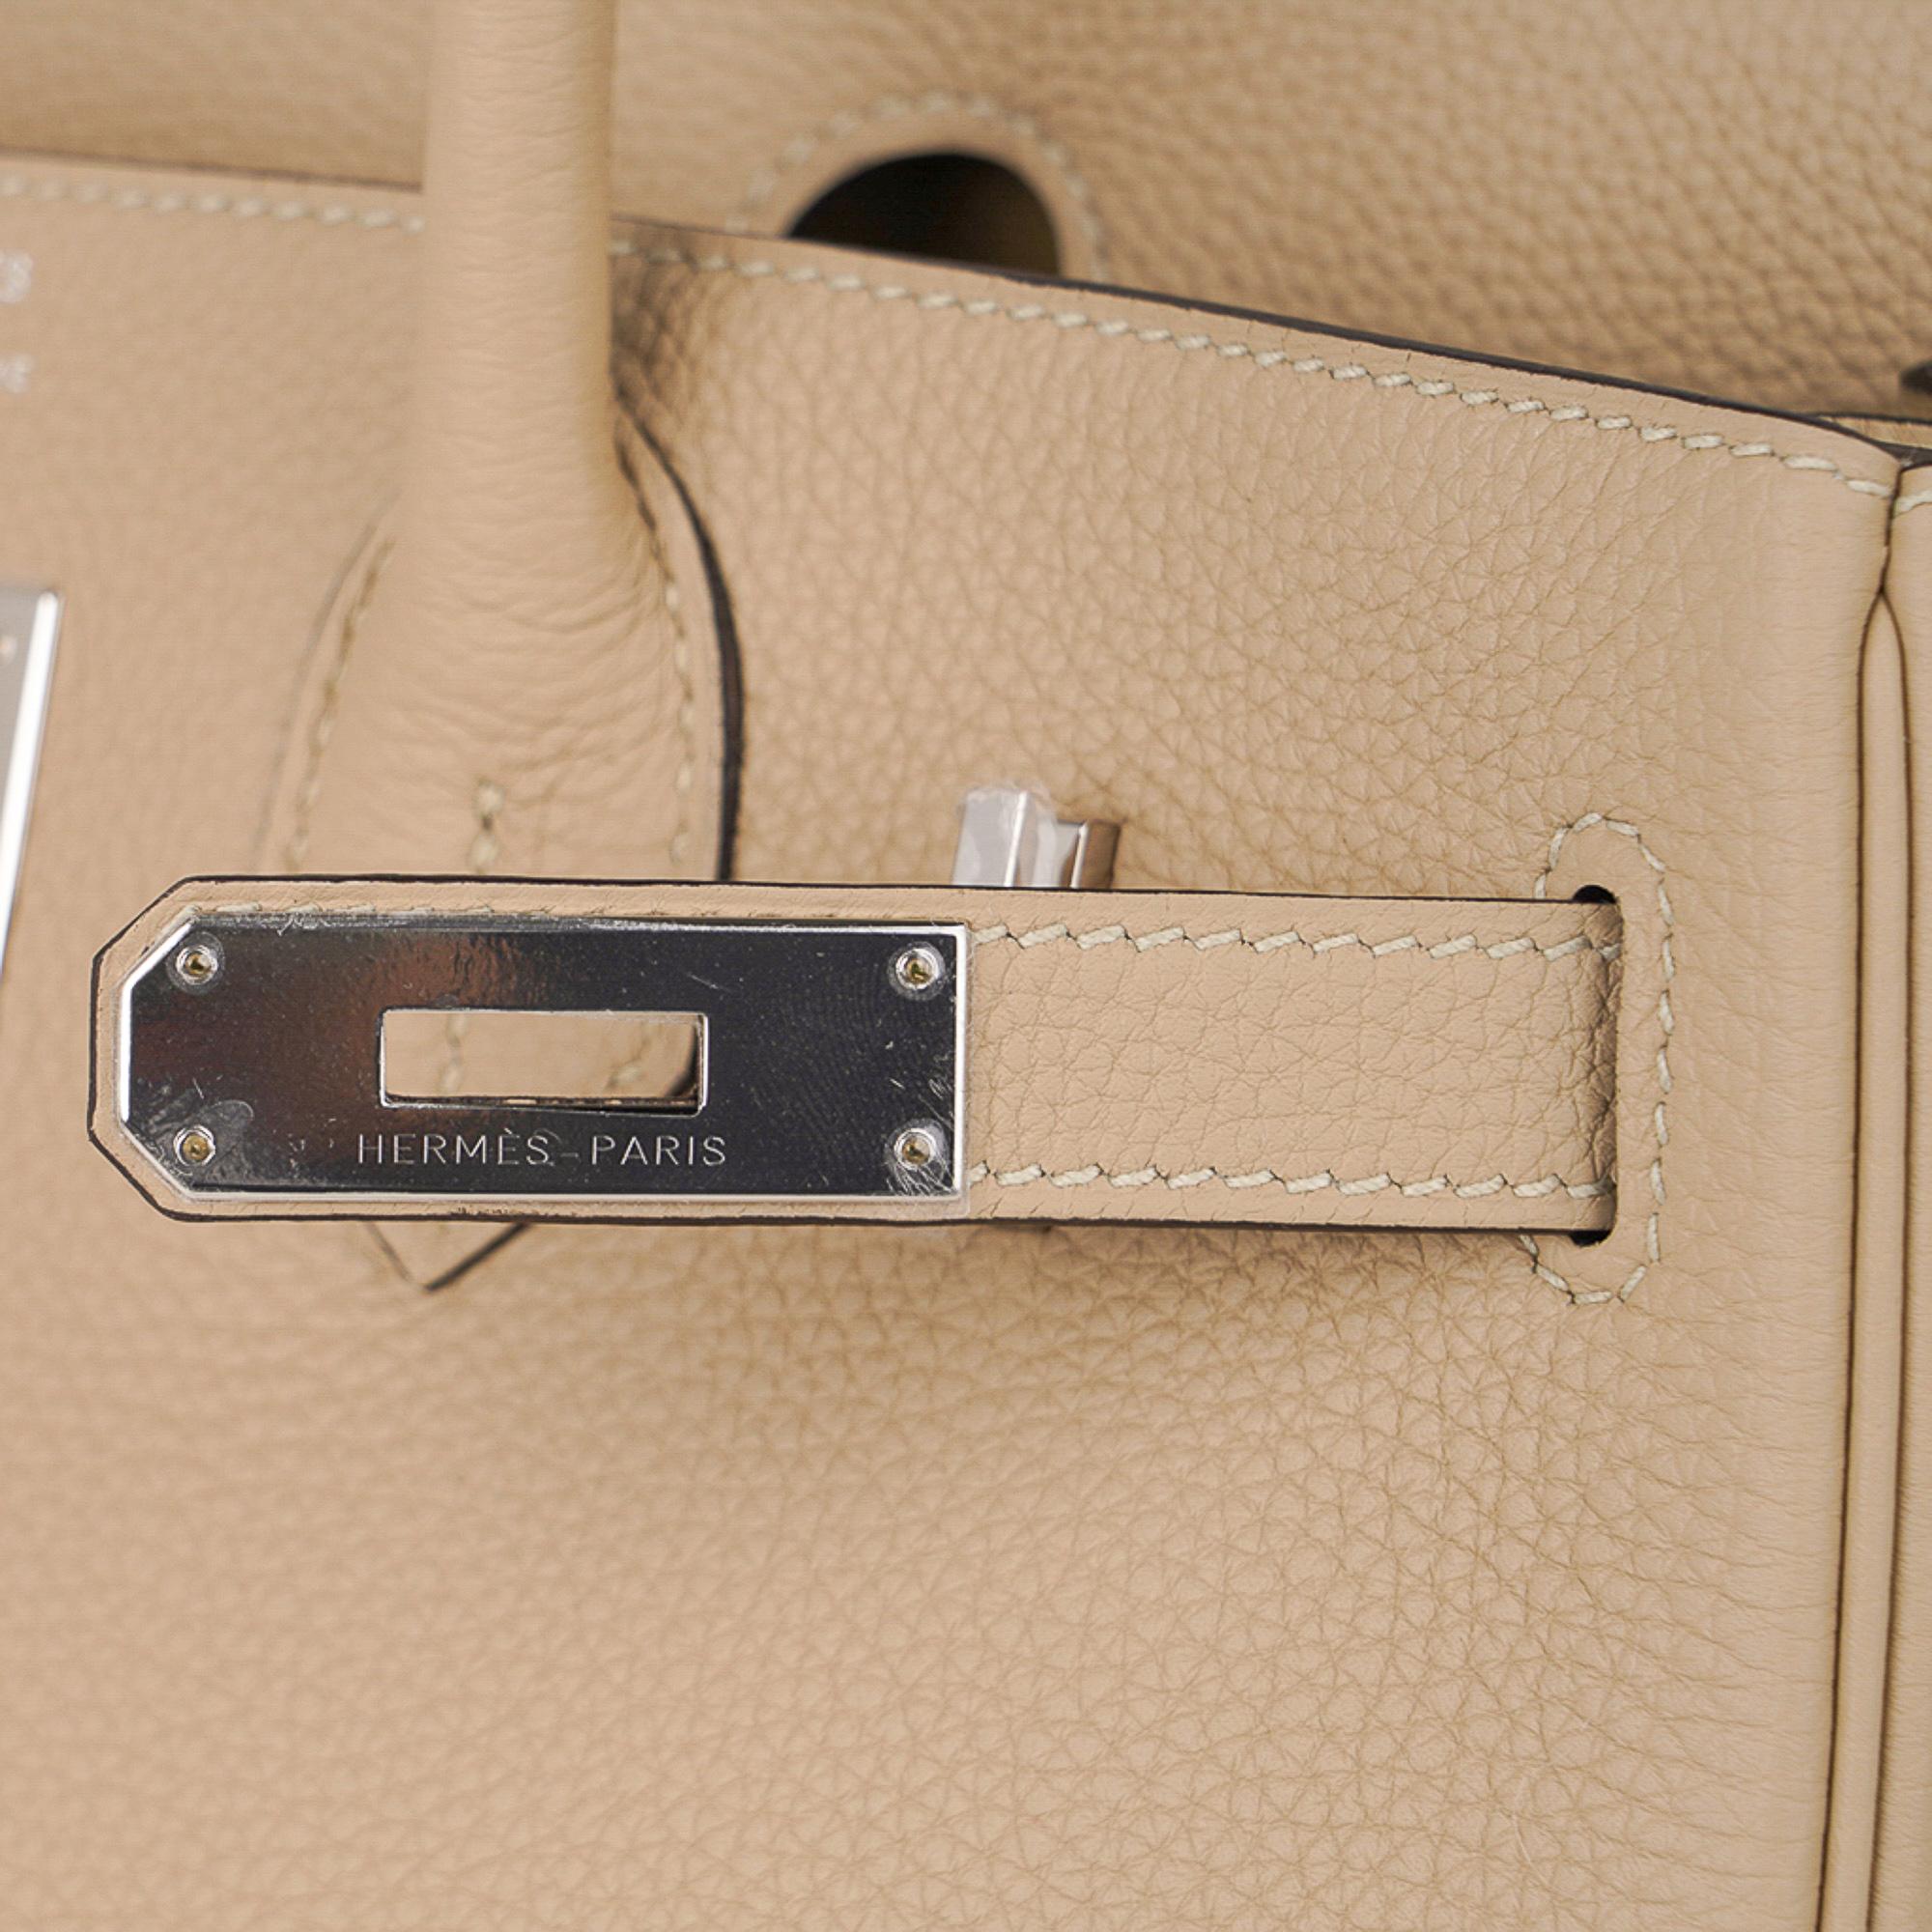 Guaranteed authentic Hermes 30 Birkin featured in neutral Trench.
Soft beige tone carries you year round.
Fresh with Palladium Hardware and togo leather.
NEW or NEVER WORN. 
Comes with the lock and keys in the clochette, sleepers, raincoat signature